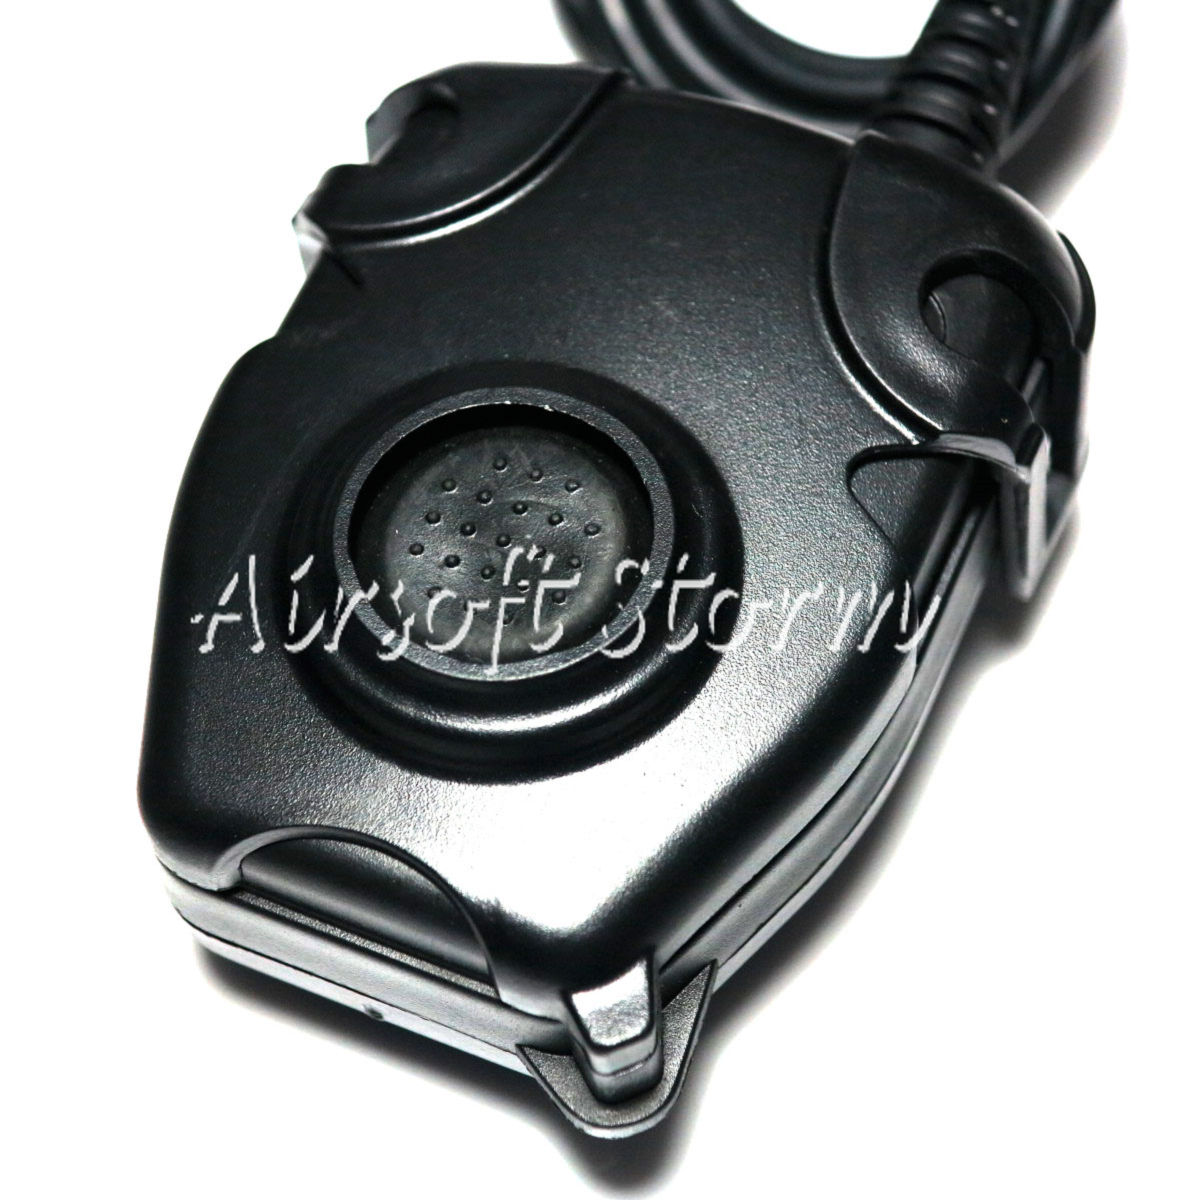 Airsoft Gear SWAT Element Peltor Headset PTT for Motorola Talkabout Radio - Click Image to Close